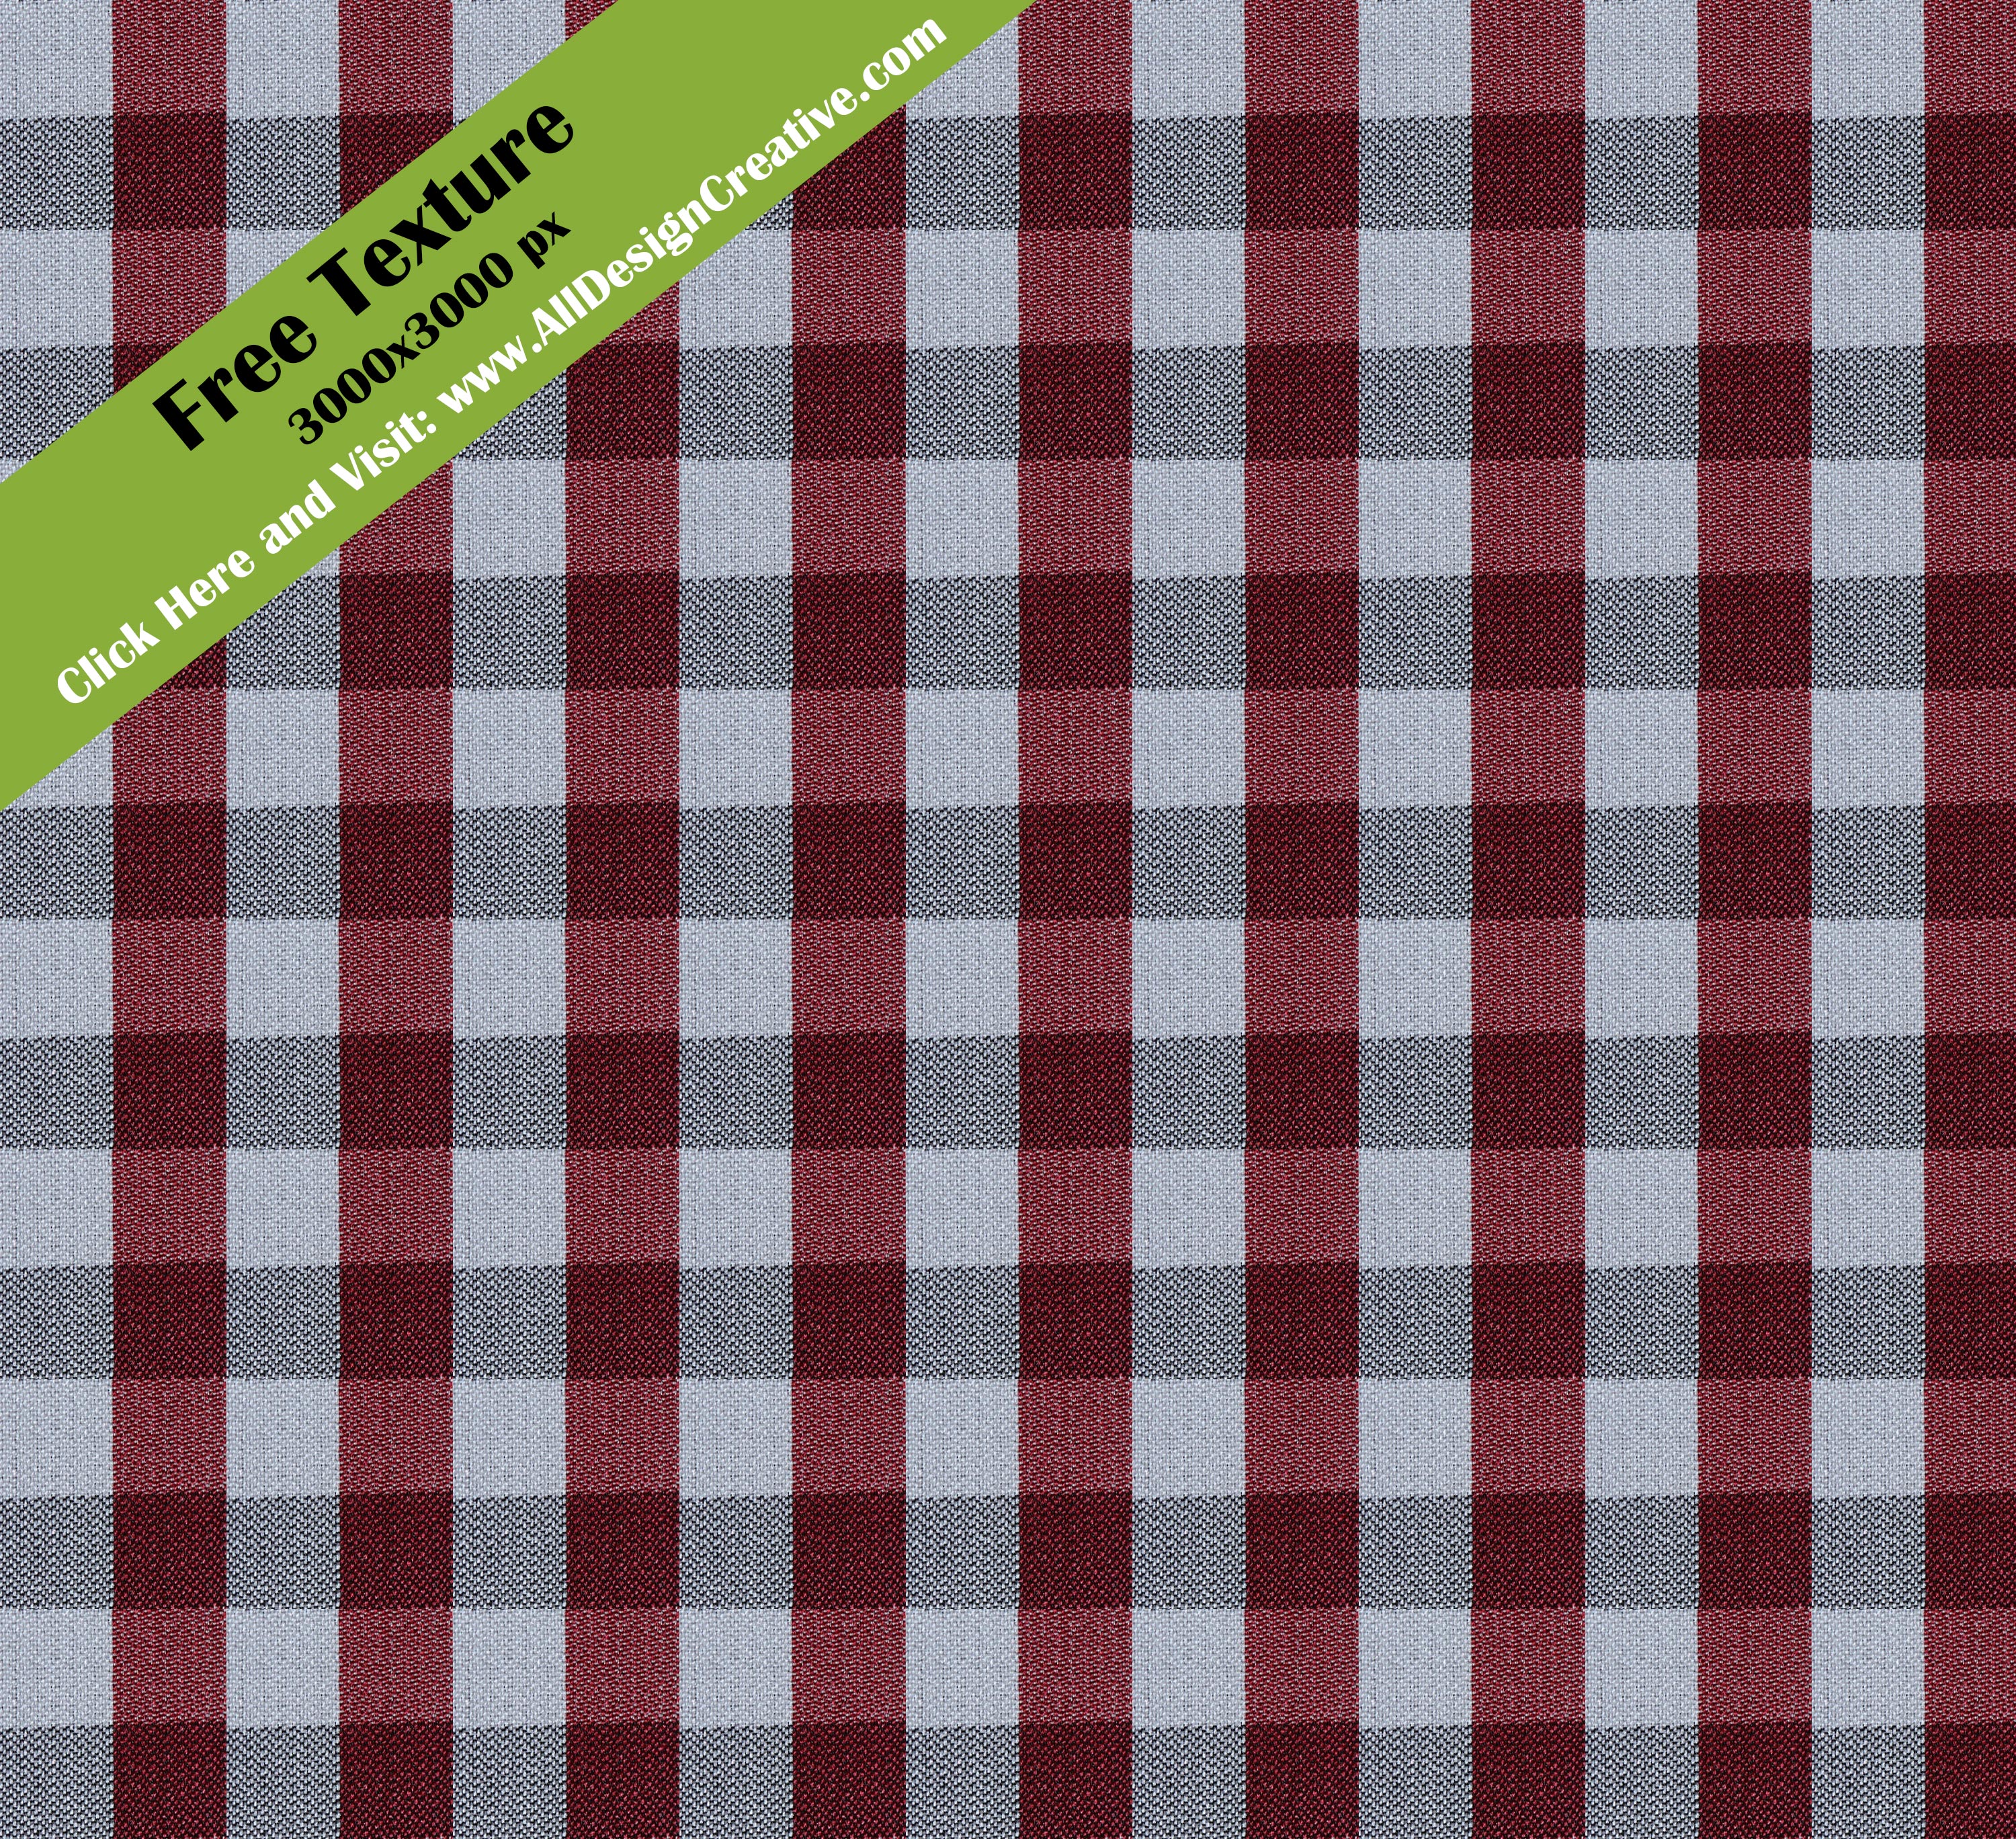 Male Cloth Texture-Free For Commercial Use